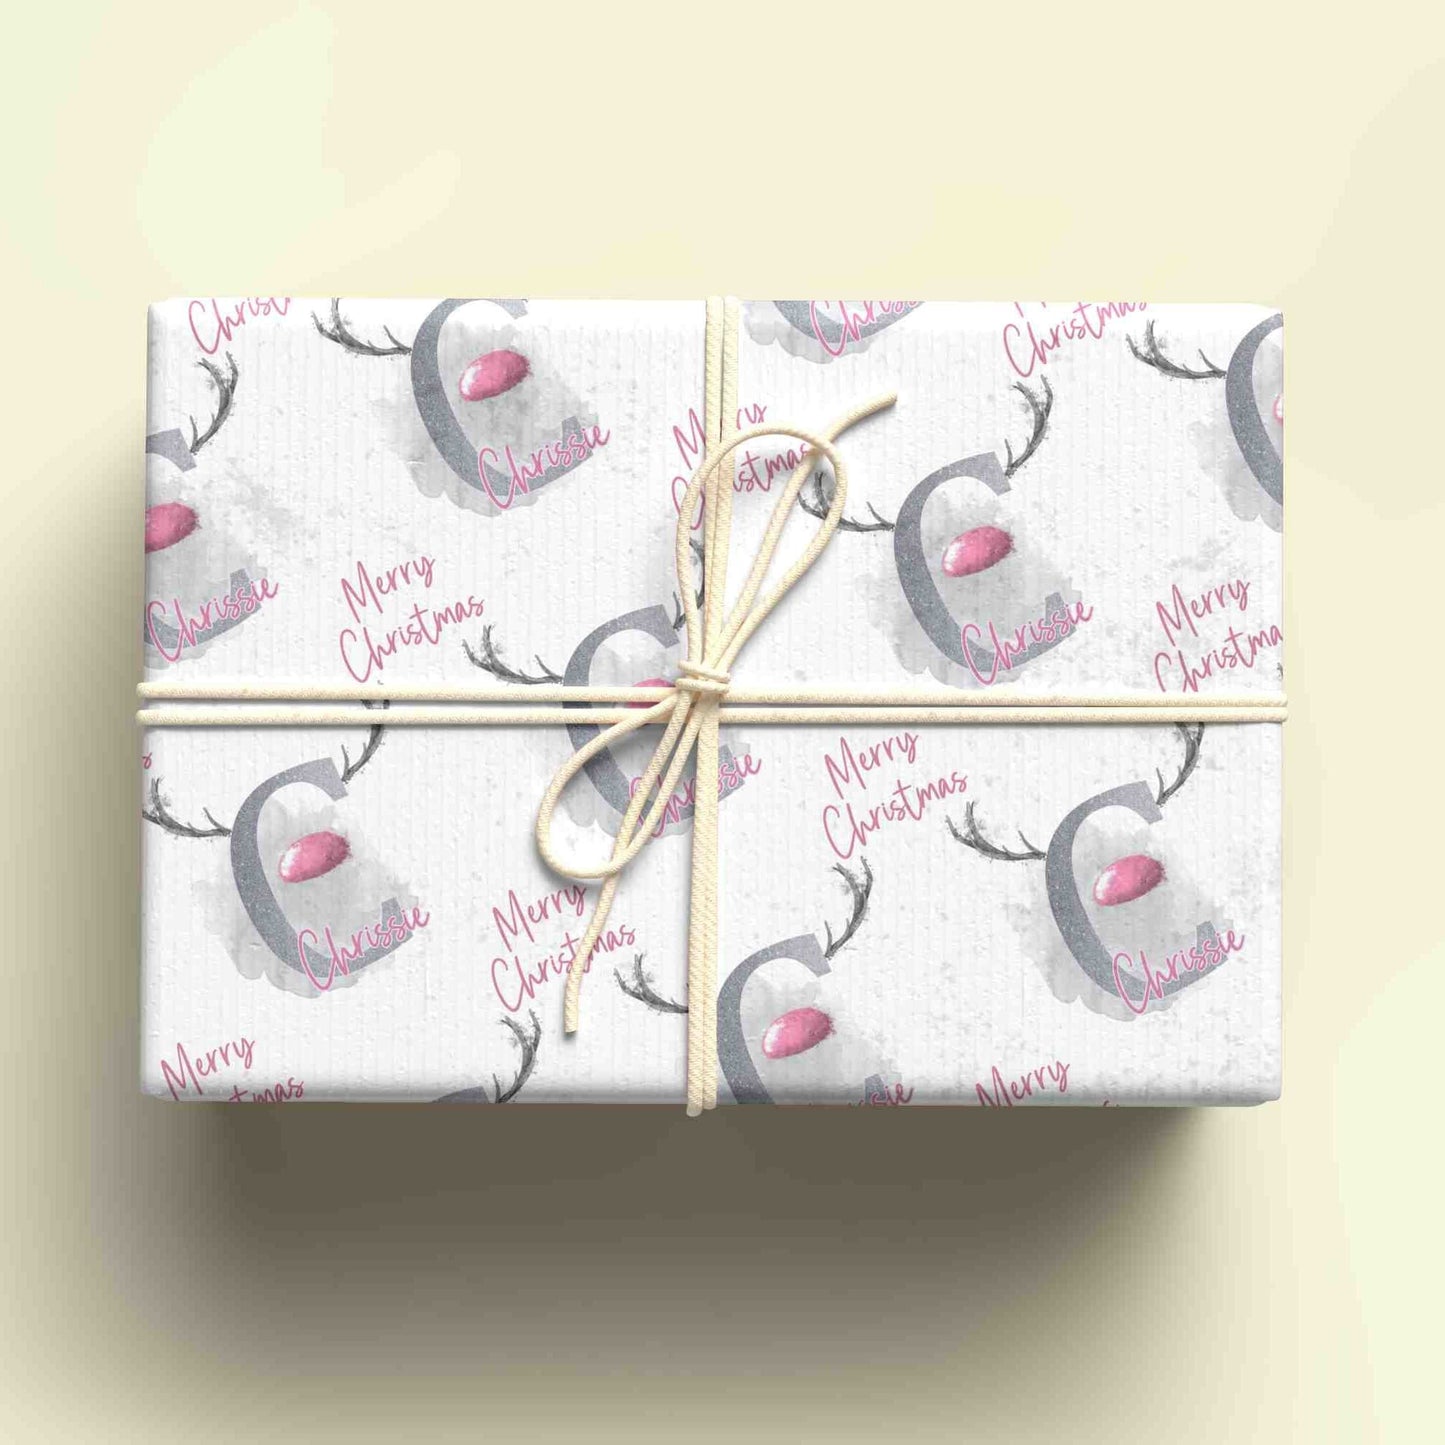 Personalised Christmas Reindeer Initial Wrapping Paper - Custom Name Gift Wrap - Festive Reindeer Design - Unique Xmas Gift Wrap - UK Seller